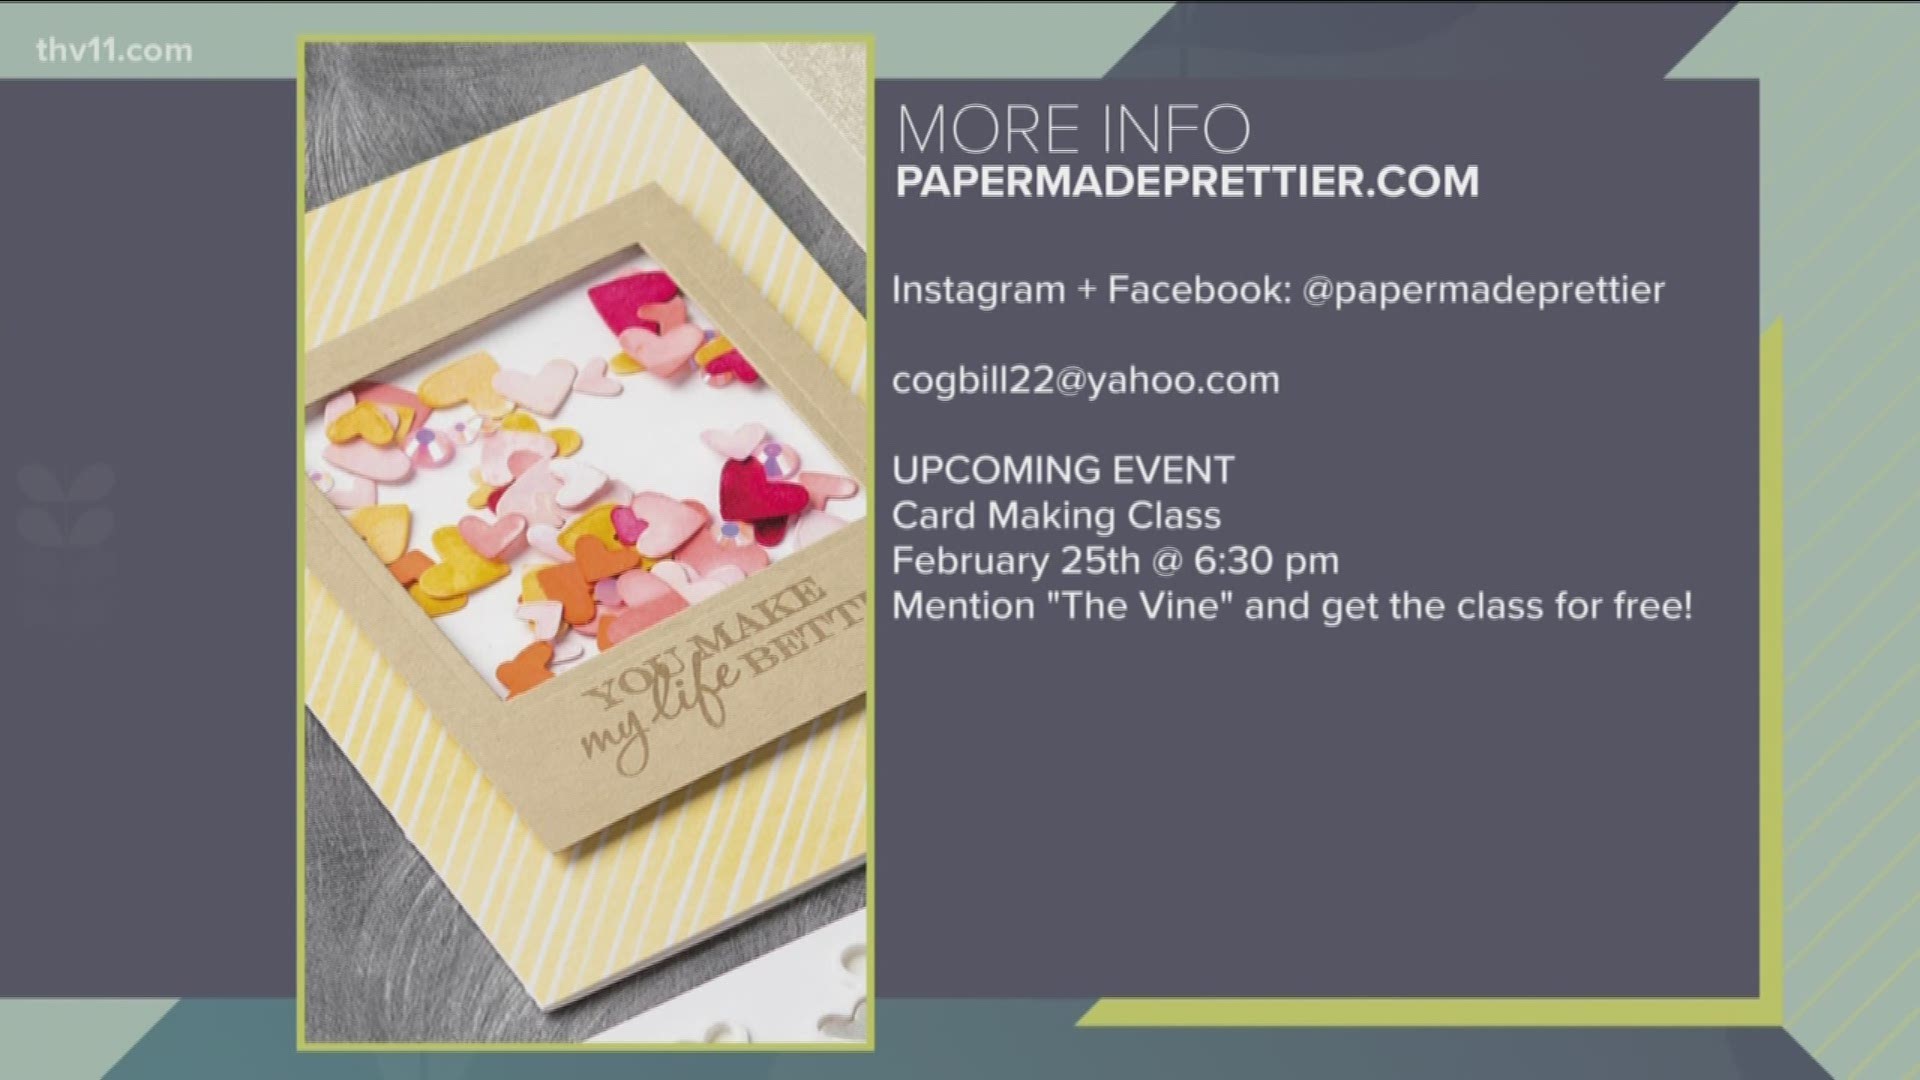 Kay Cogbill with Paper Made Prettier helps you create your own beautiful cards and she's got a special offer just for Vine viewers!